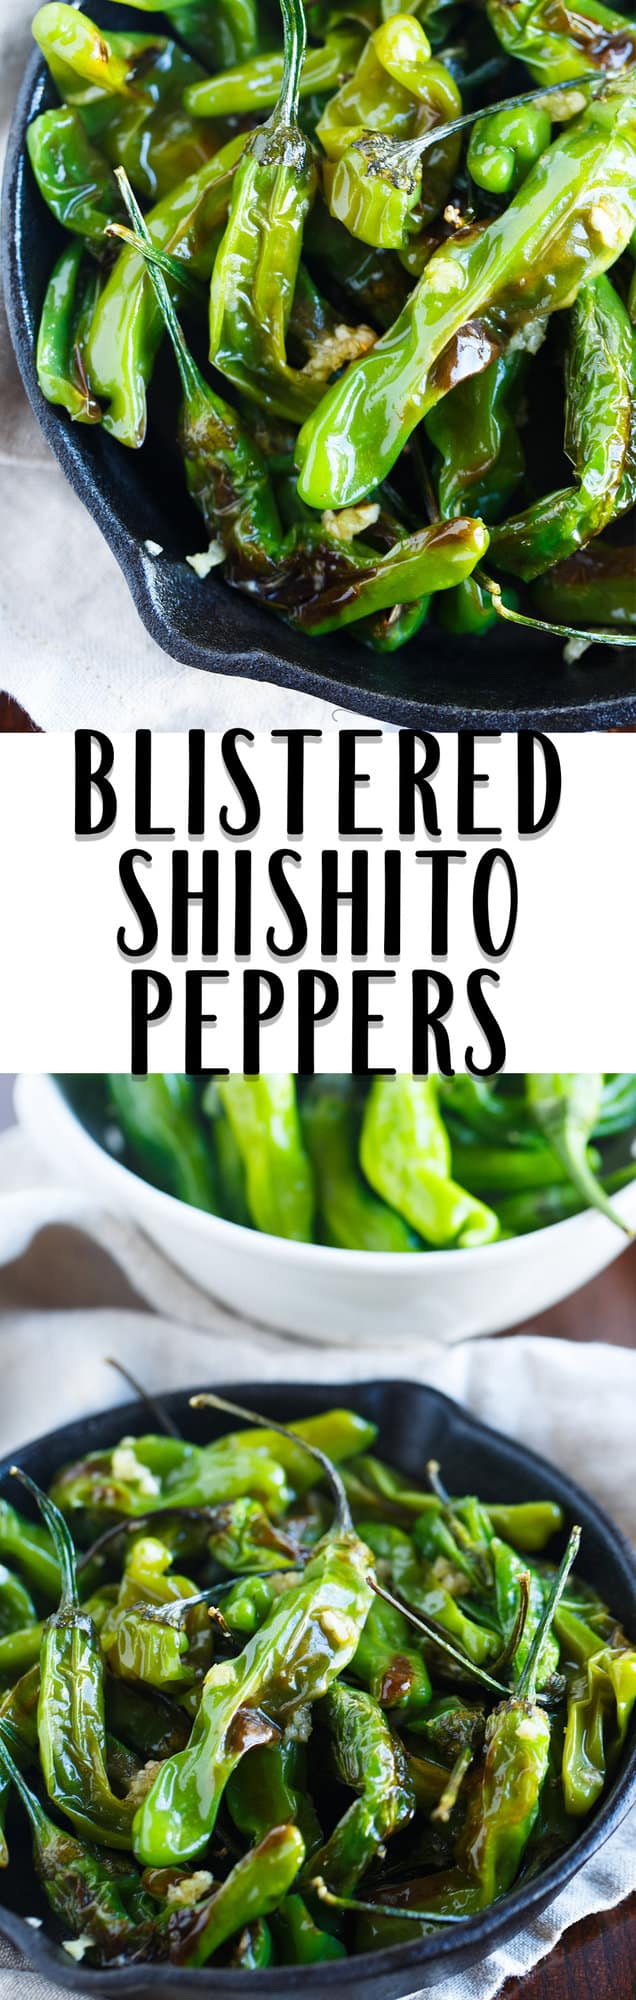 Blistered shishito peppers tossed in garlic and olive oil make for a great snack if you're feeling a little heat!